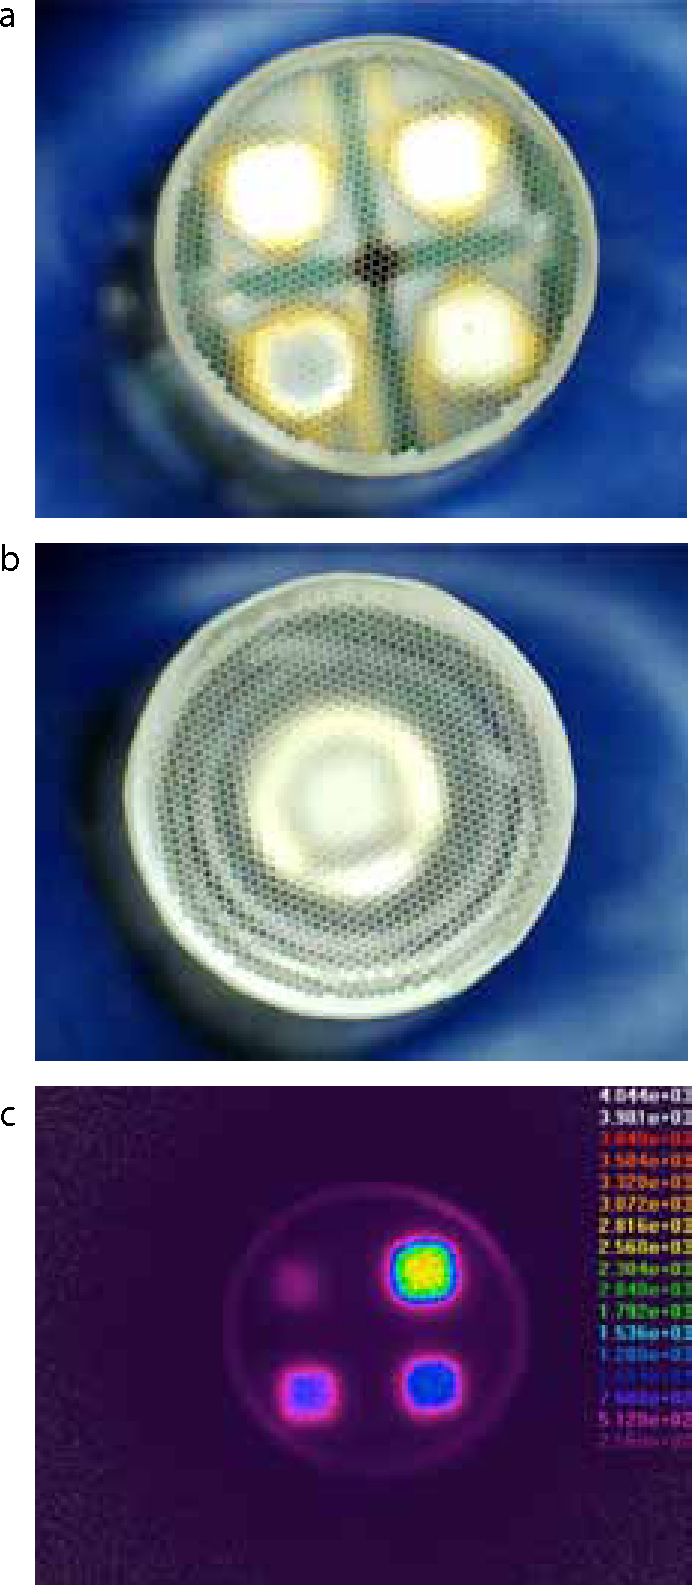 Figure 2 from Light-curing considerations for resin-based